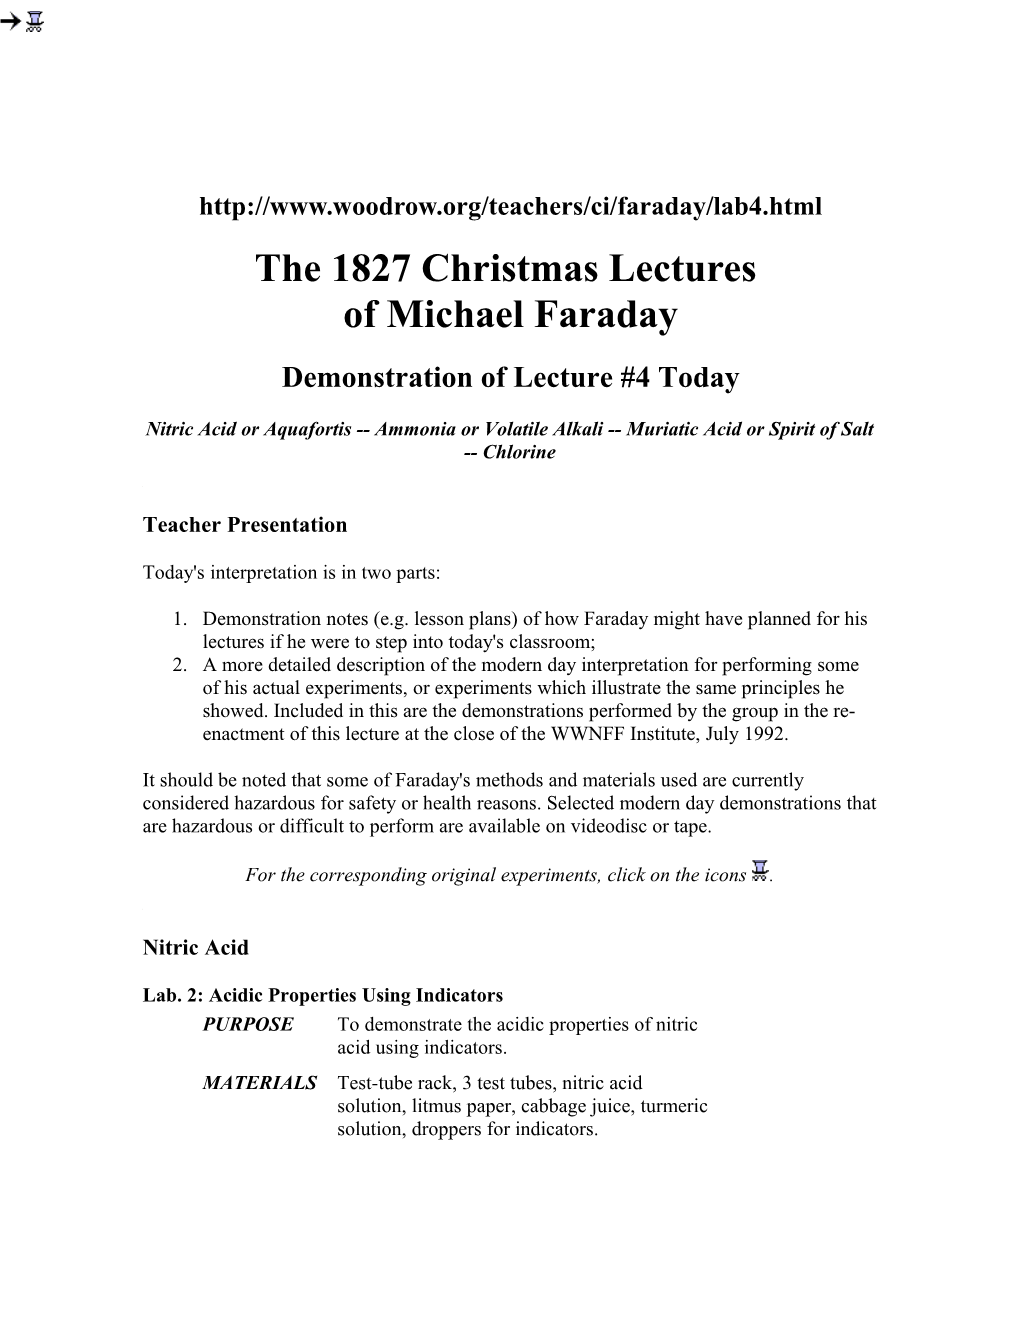 The 1827 Christmas Lectures of Michael Faraday